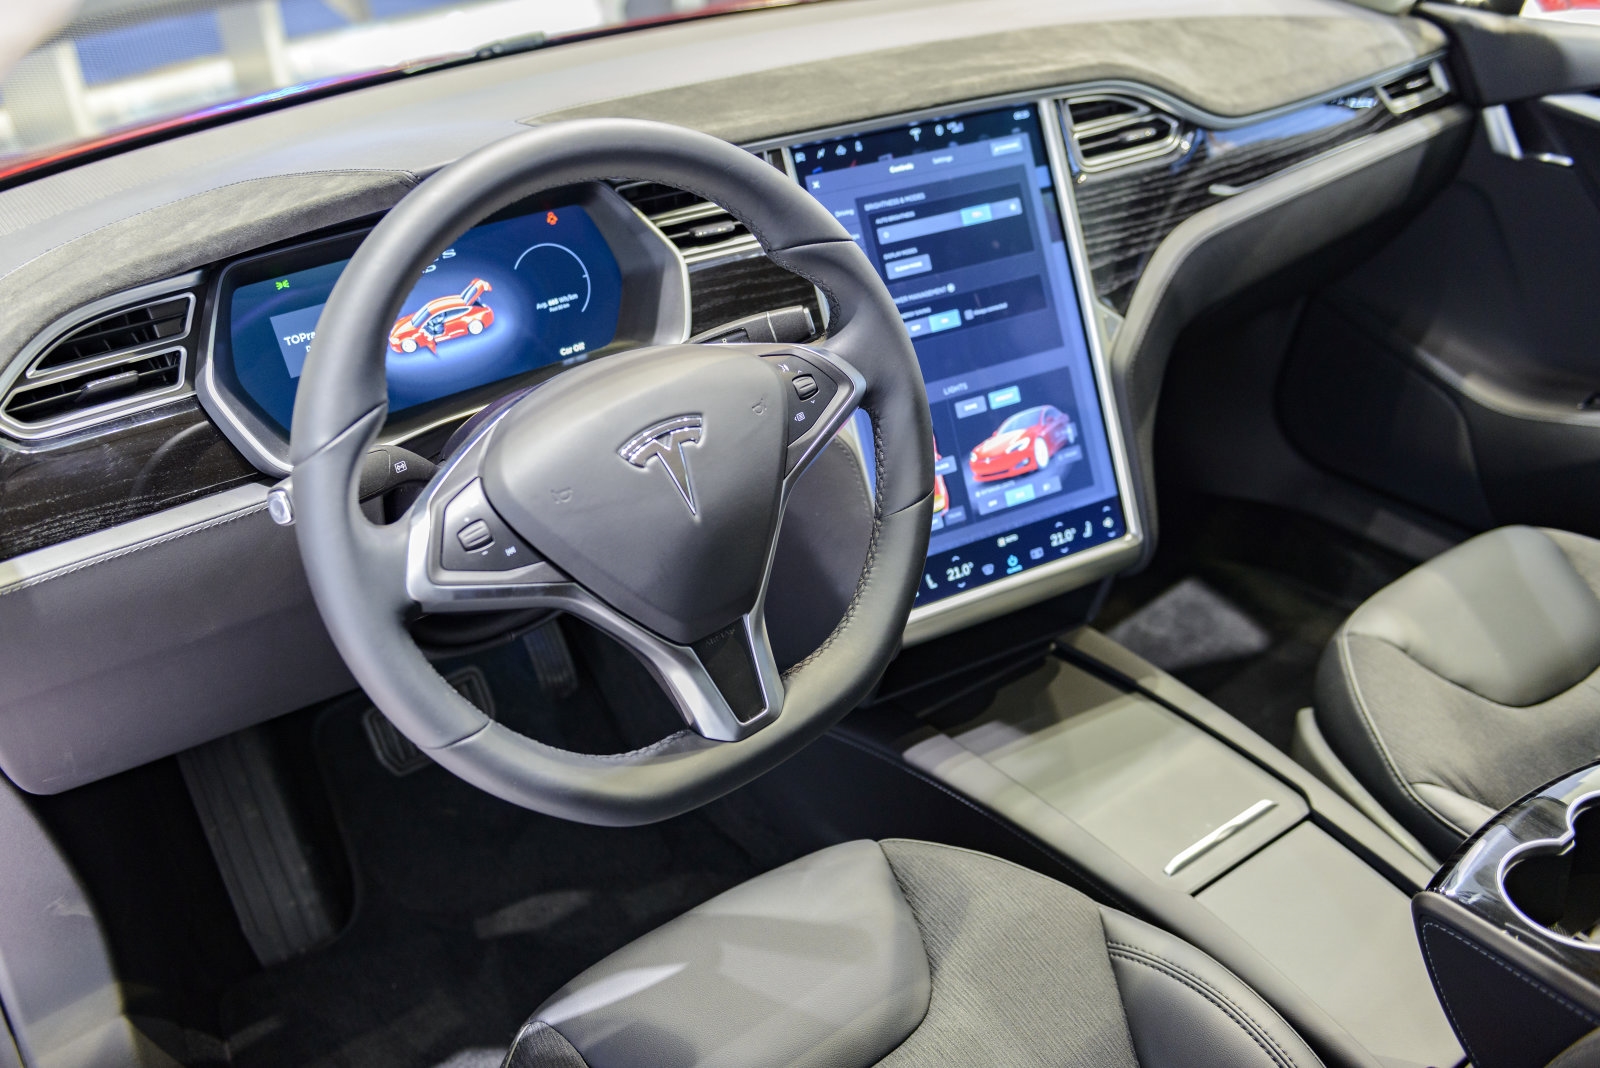 Tesla's dashboard Sketchpad is getting an upgrade | DeviceDaily.com